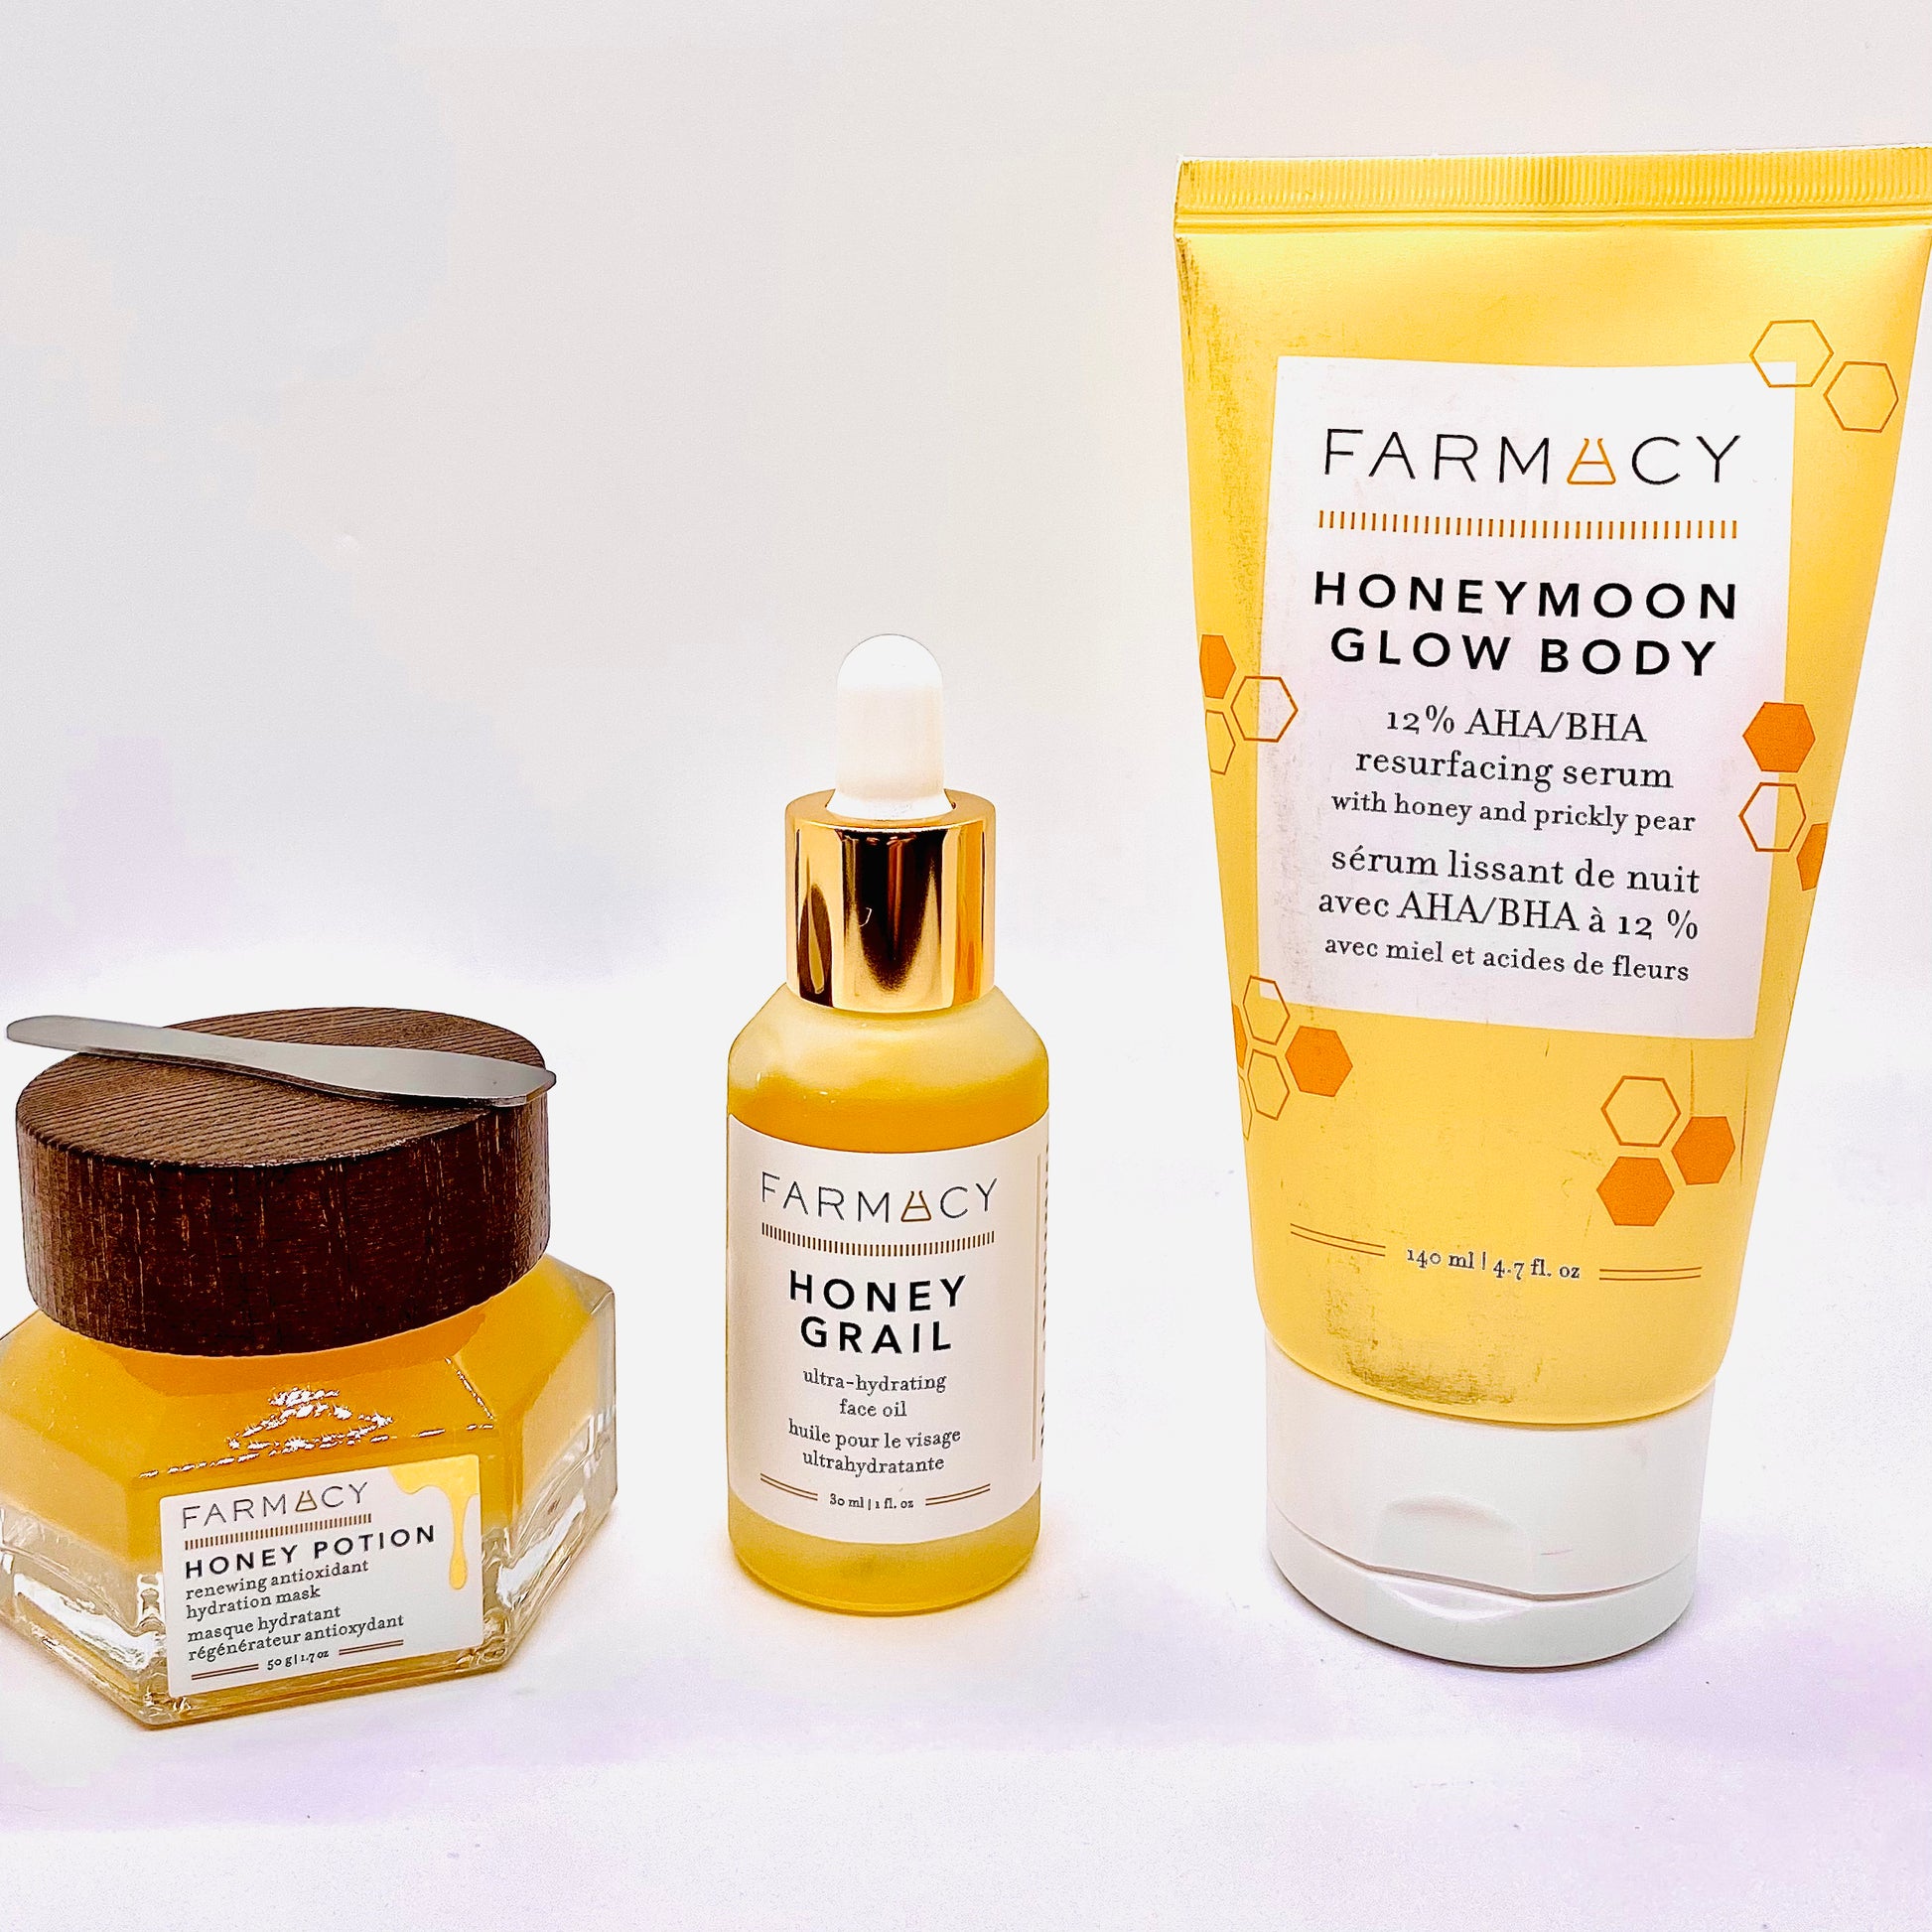 Farmacy Honeymoom Glow 3 piece Anti aging power Bundle which includes one fullsize cleanser, one full siz honey grail ultra hydrating face oul and last but not least, one super anti aging Night and day moisturizer- All products have been curated specifically for Facetreasures Boutique and sister sites and you will jot find this set ir bundle anywhere else except here at facetreasures.com